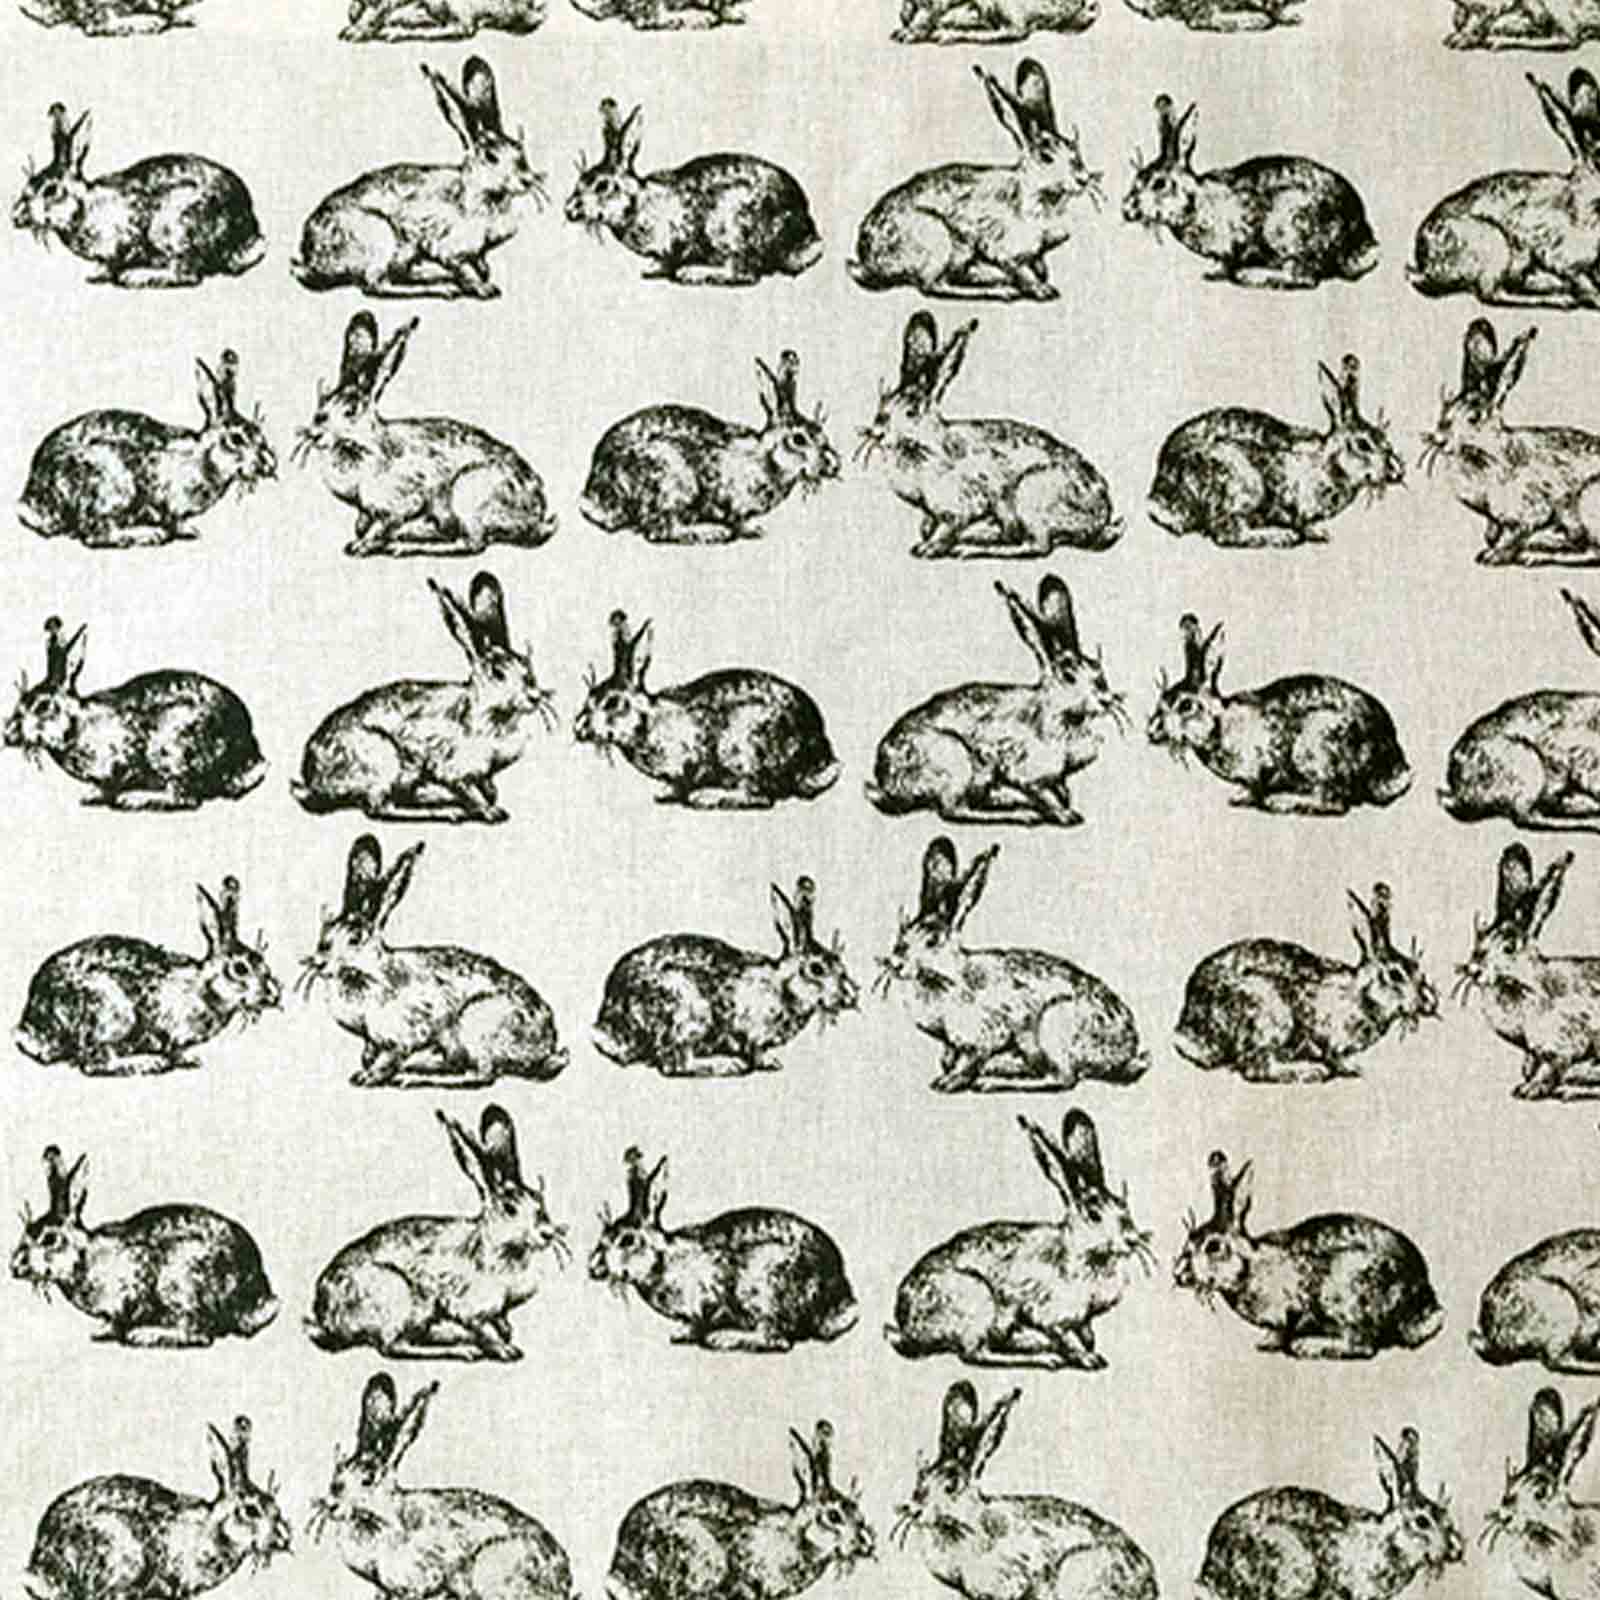 Hare 100% Cotton Fabric Placemats - Set of 4